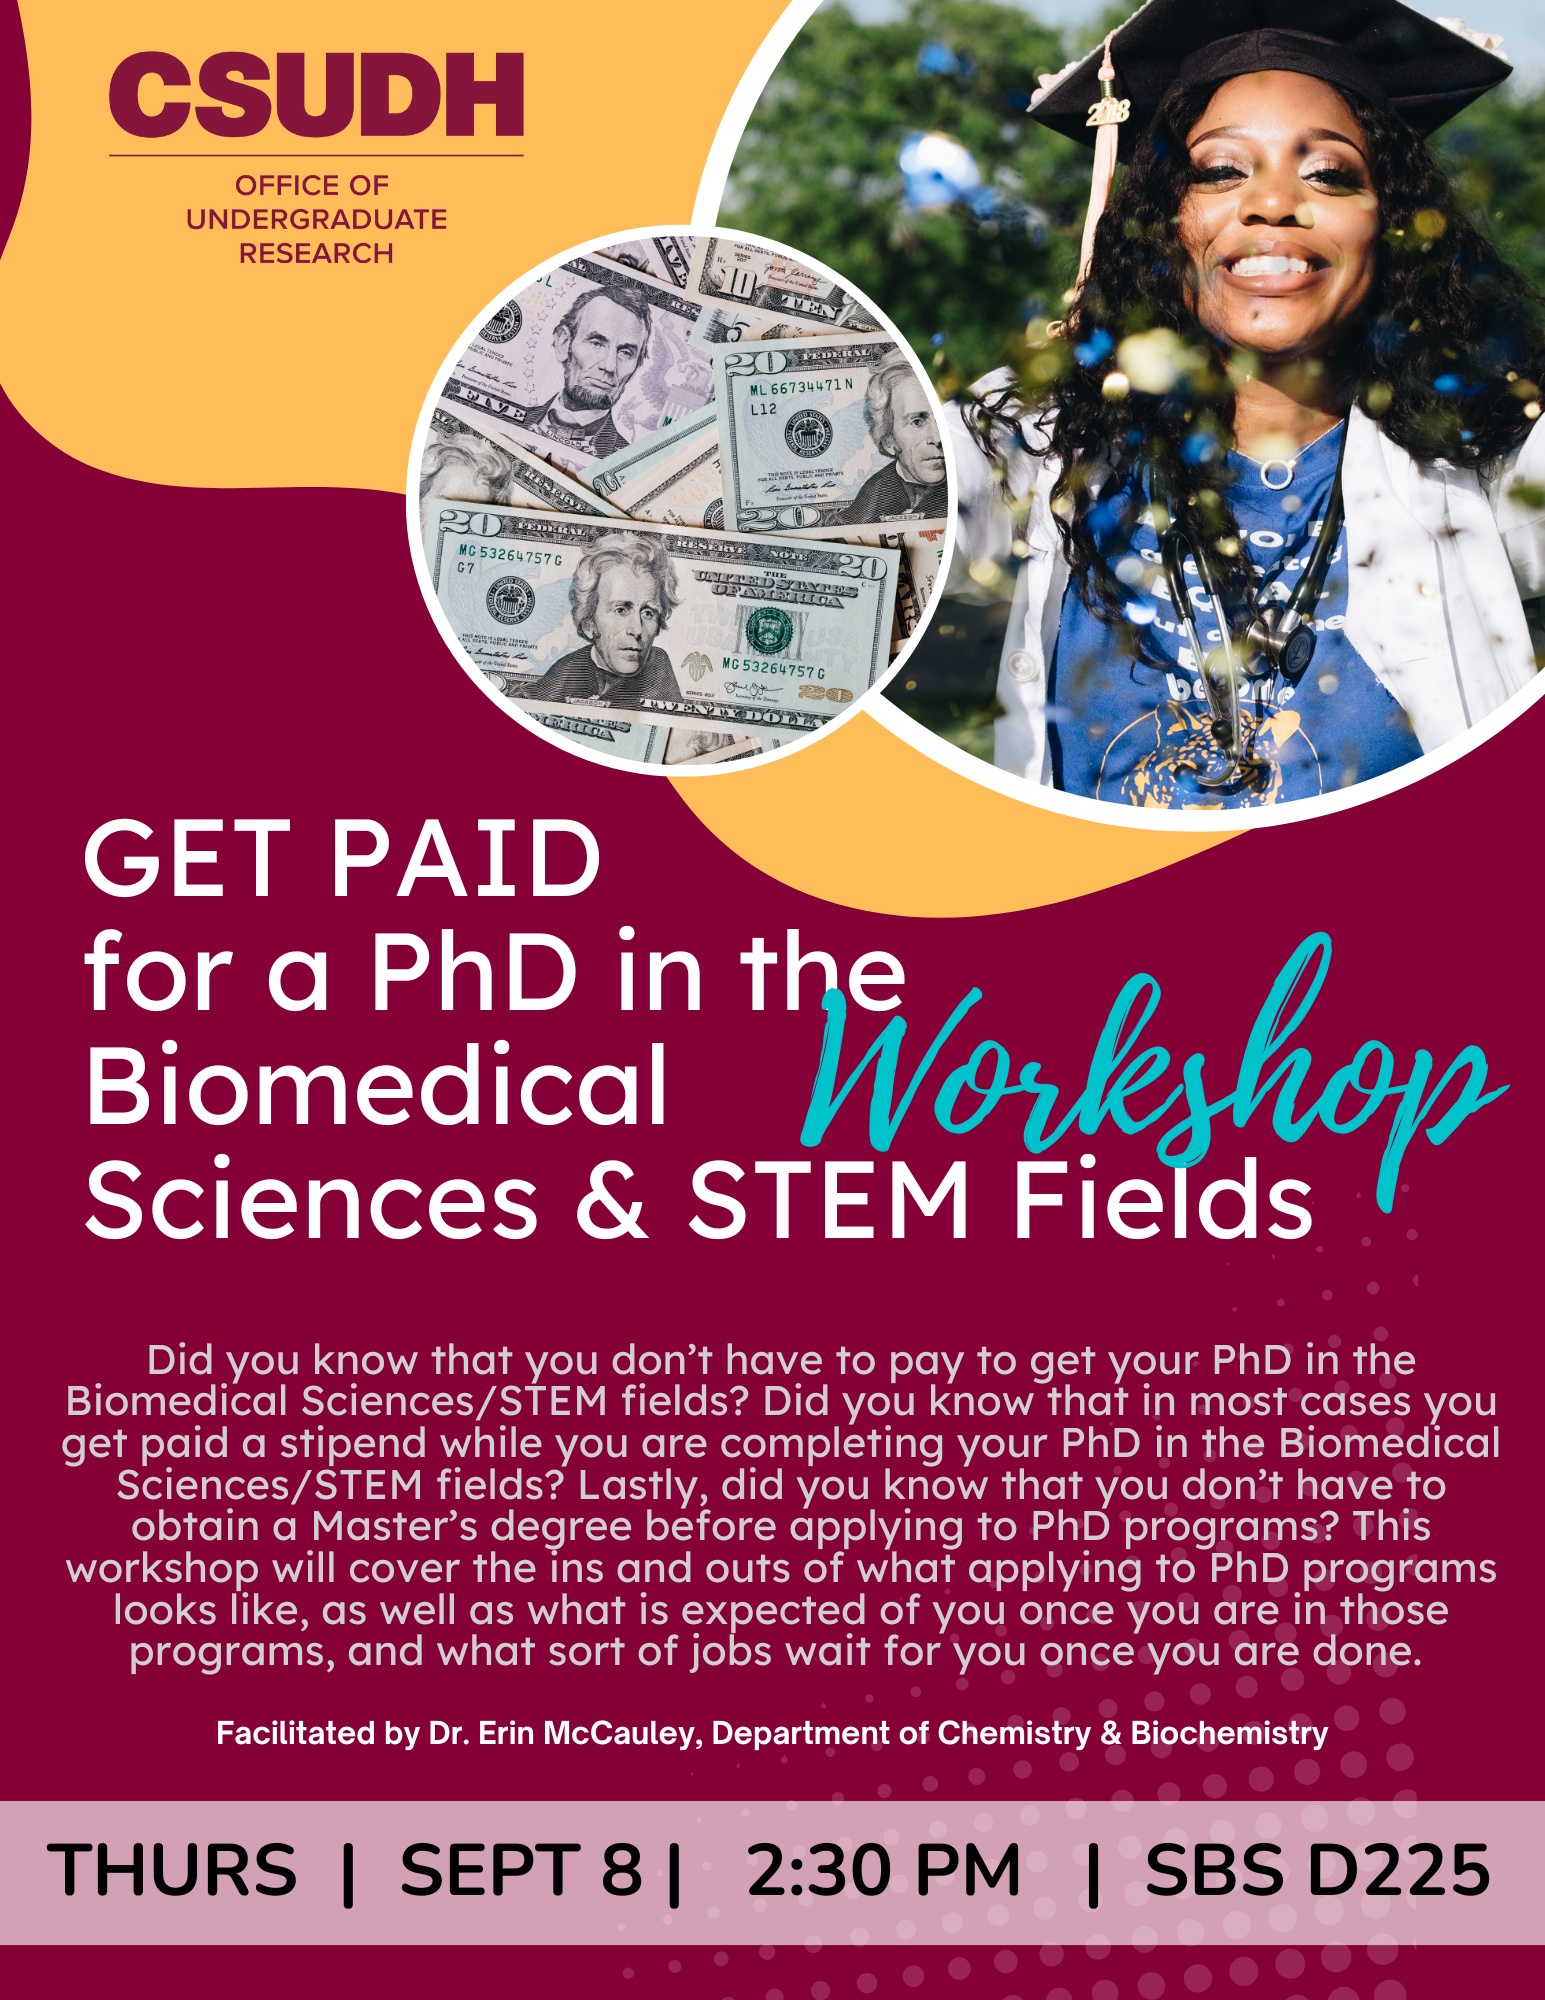 Get-Paid-for-a-PhD-in-Biomedical-Sciences-STEM-9-8-22